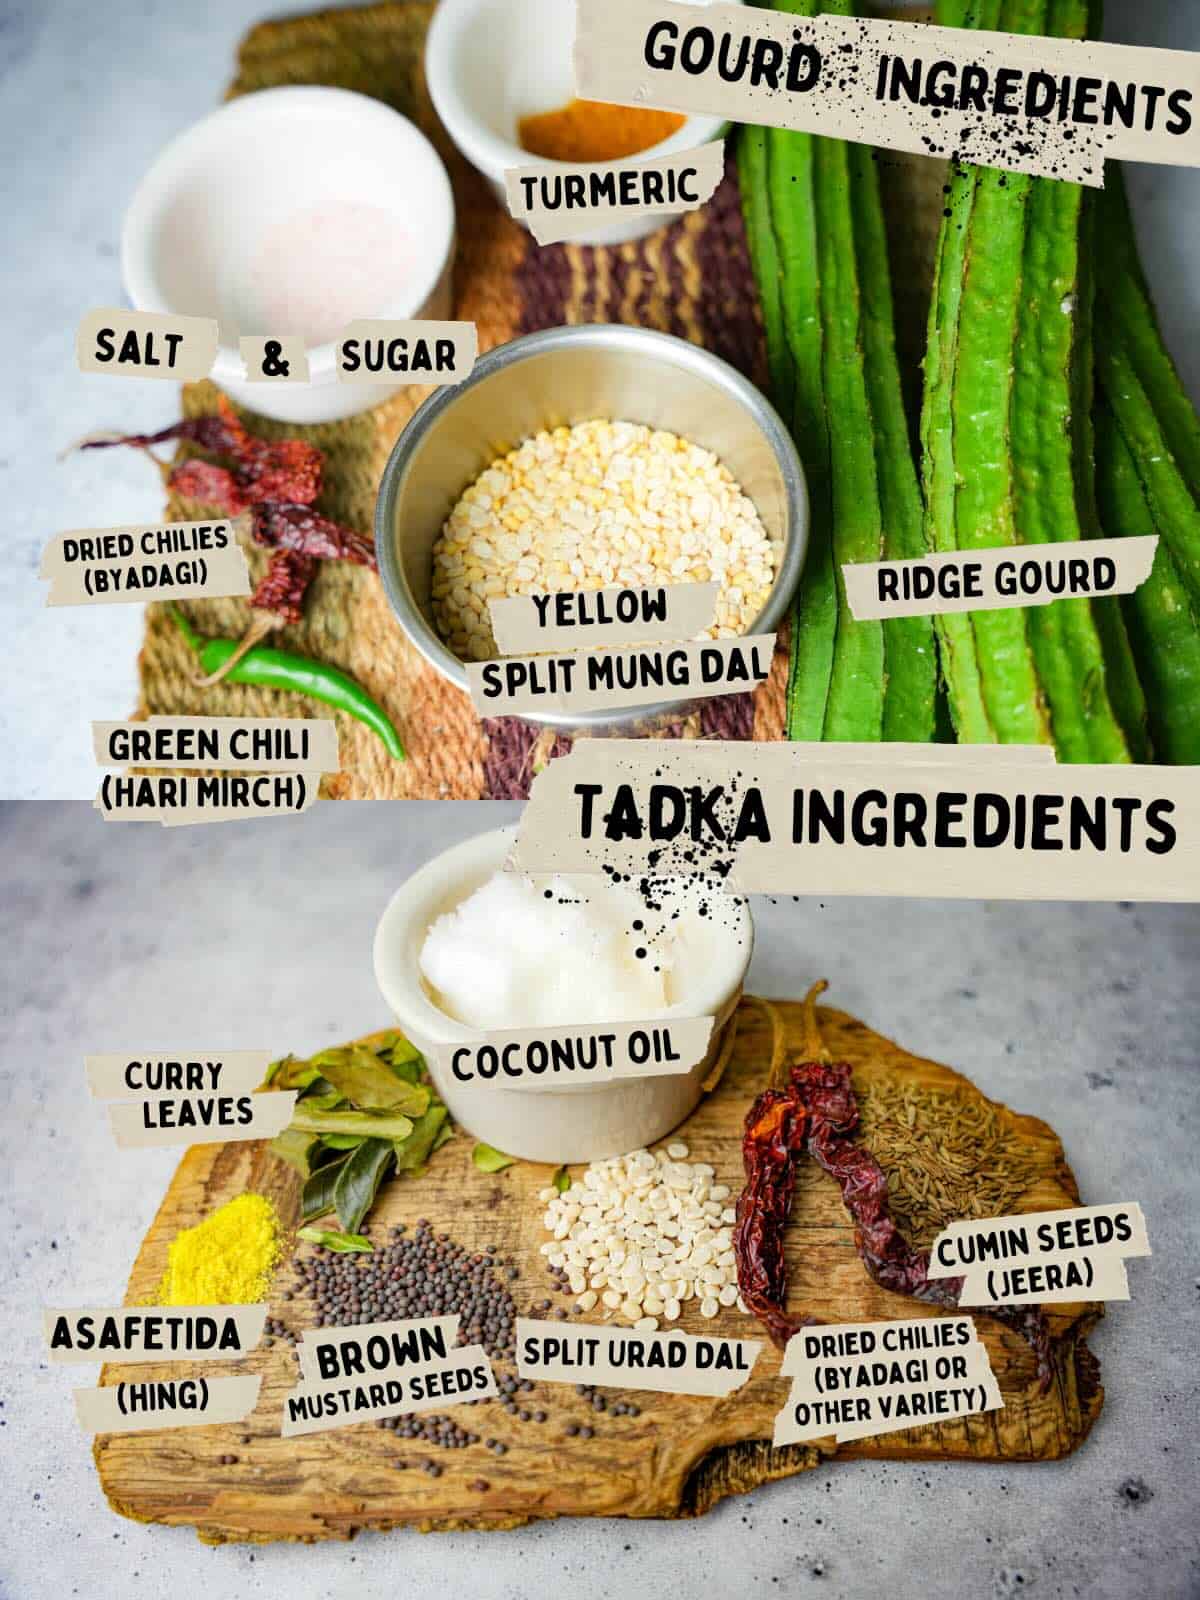 ingredients for Peerkangai and its tadka on a cutting board.